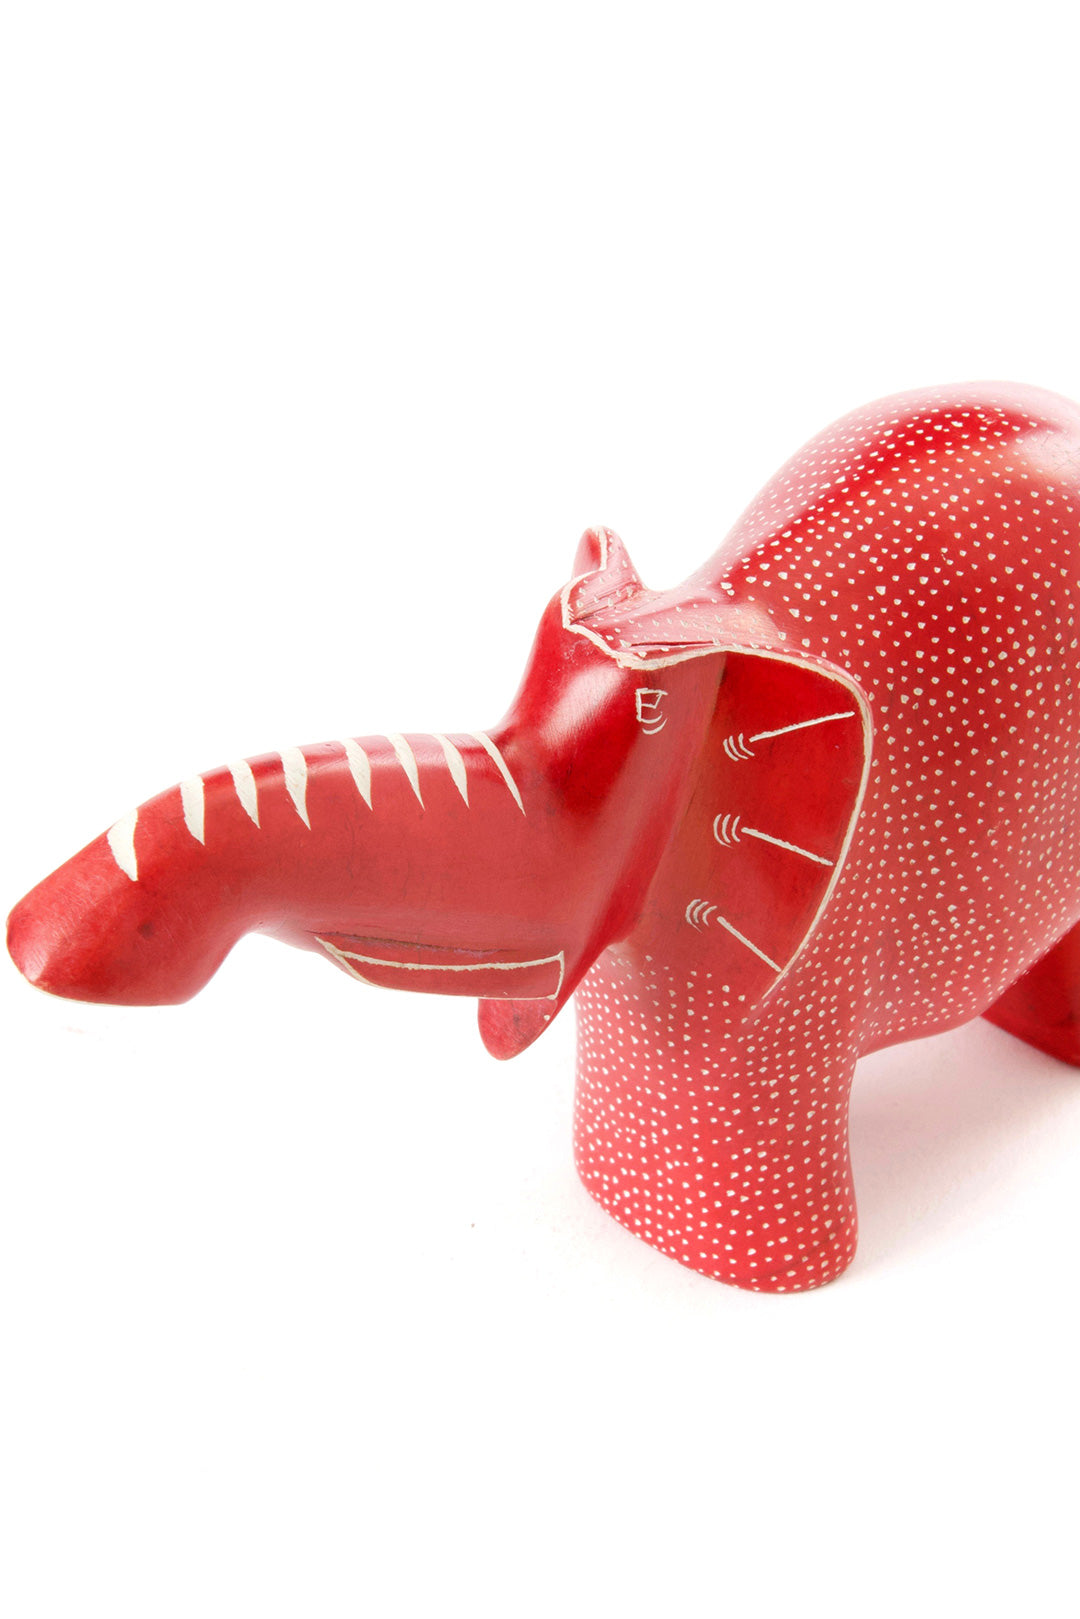 Large Red Polka Dot Elephant with Trunk Up